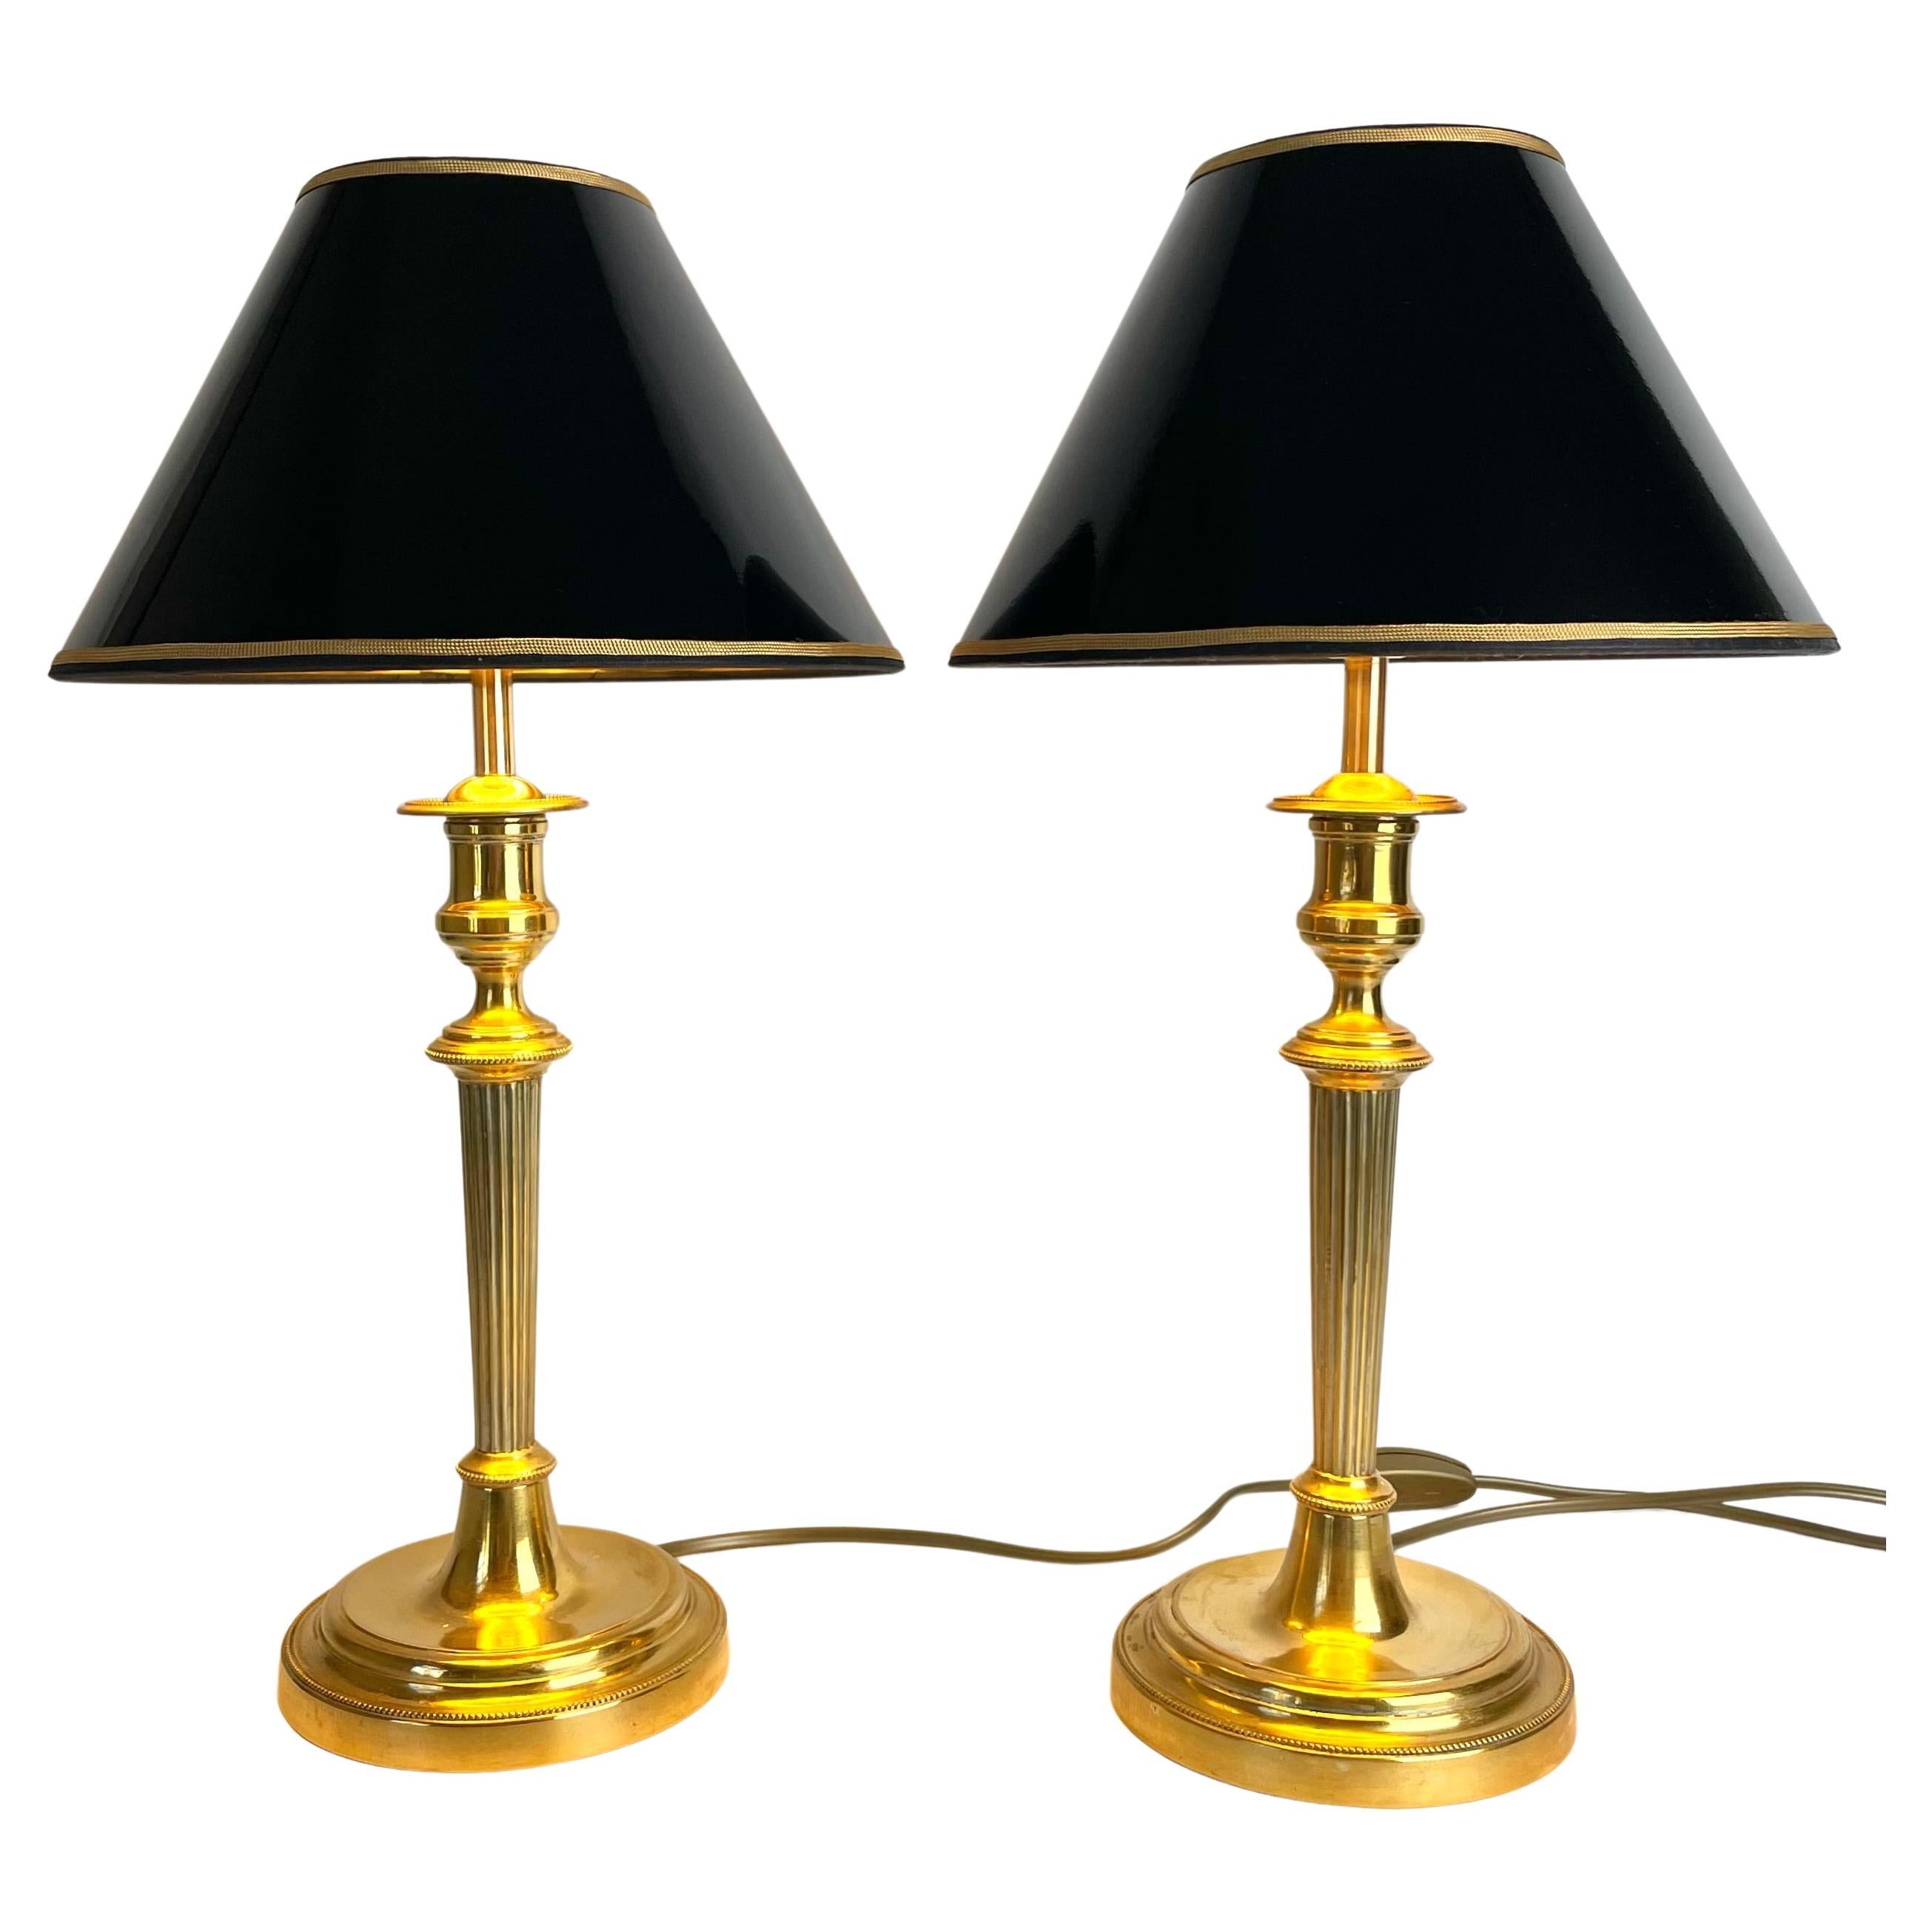 Beautiful pair of Empire Table Lamps, originally candlesticks from the 1820s For Sale